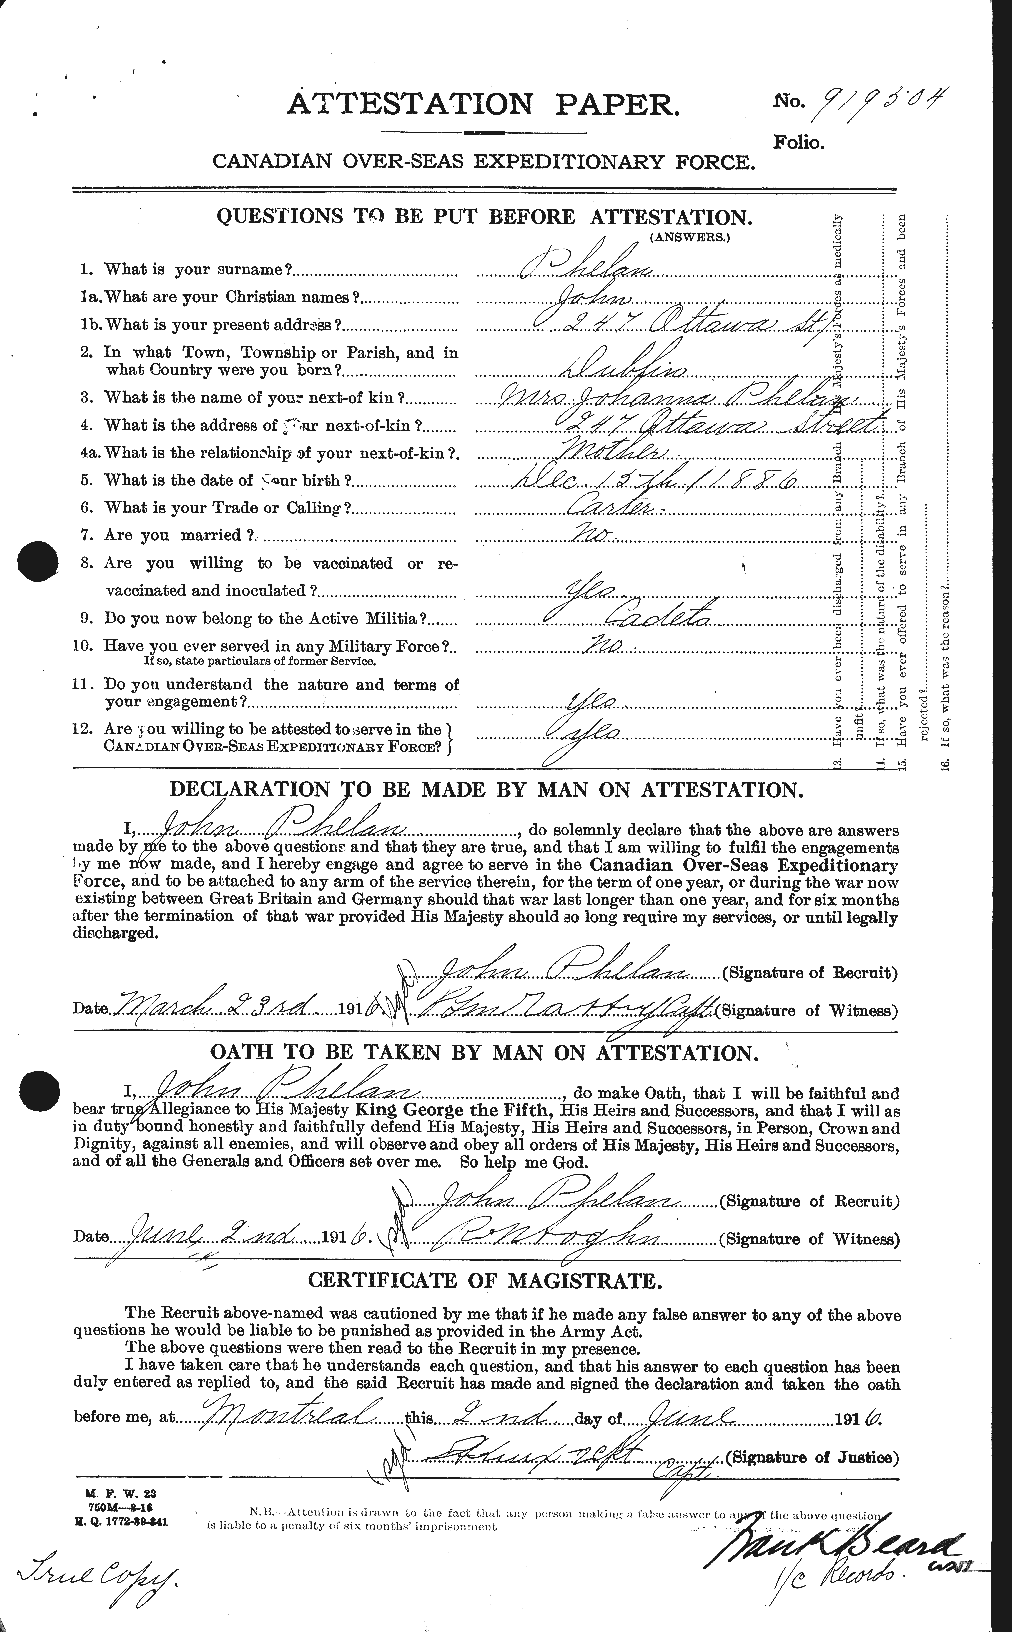 Personnel Records of the First World War - CEF 576954a